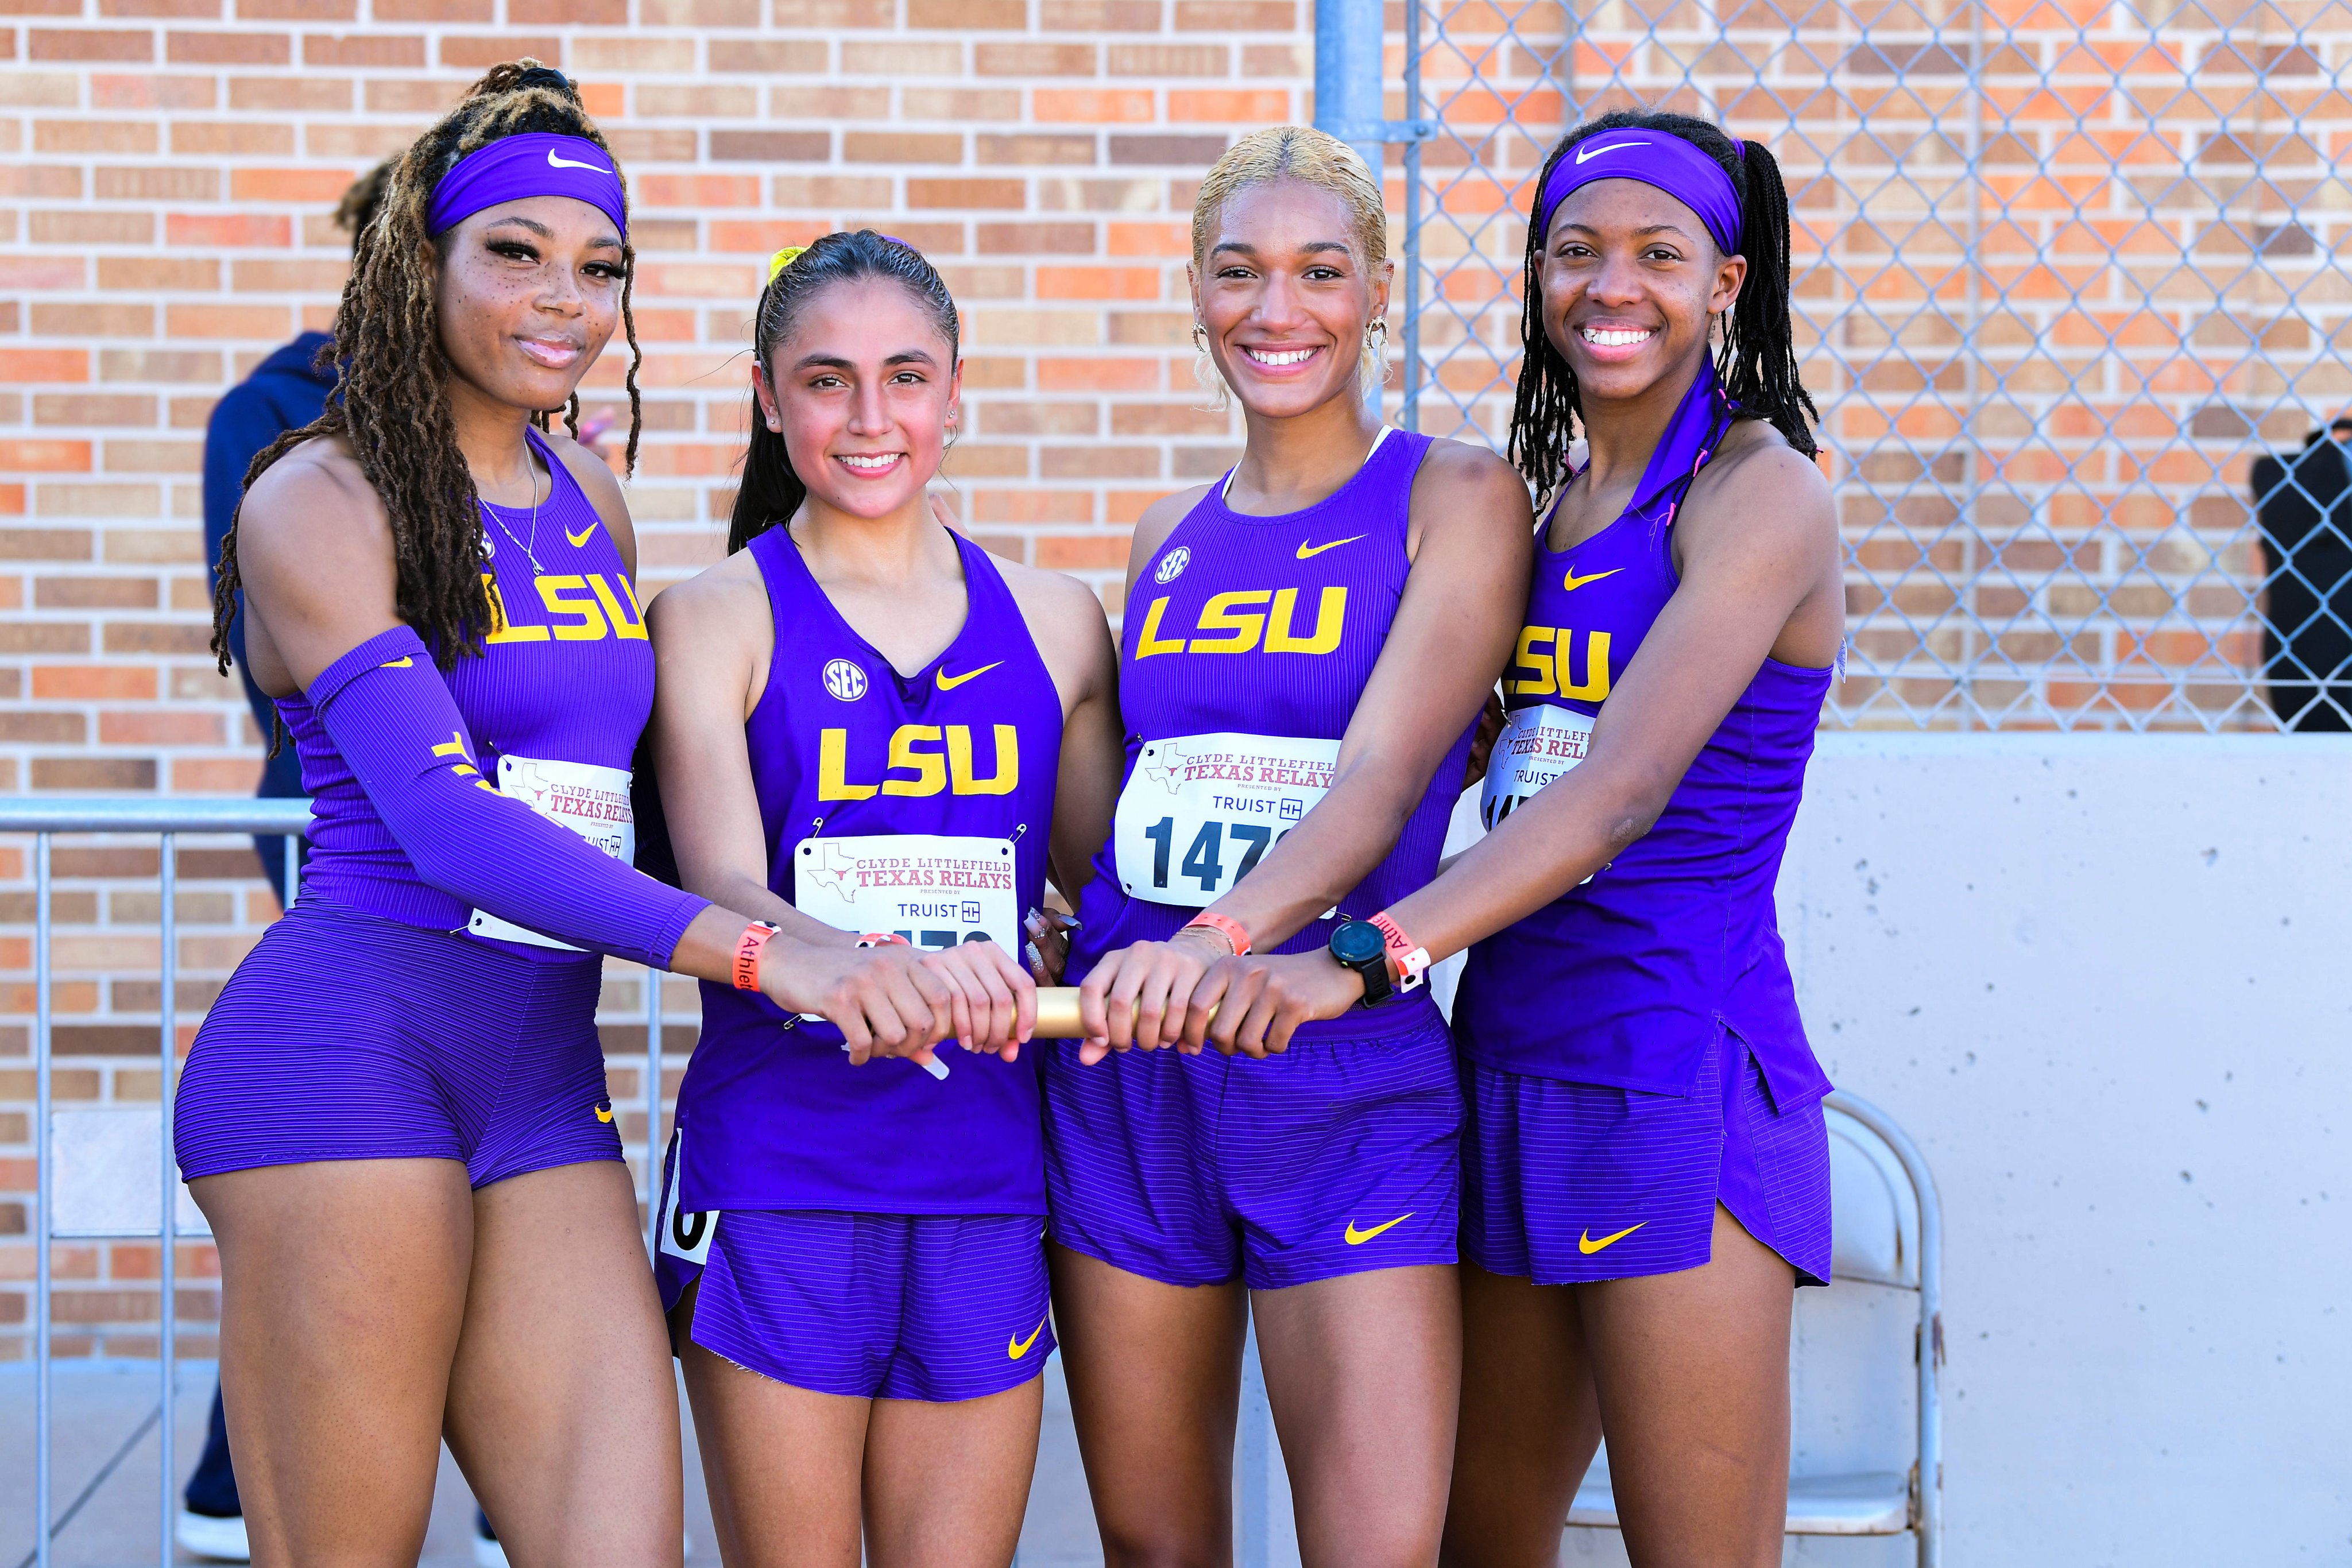 School records fall for LSU’s distance medley relay, Pedigo in second